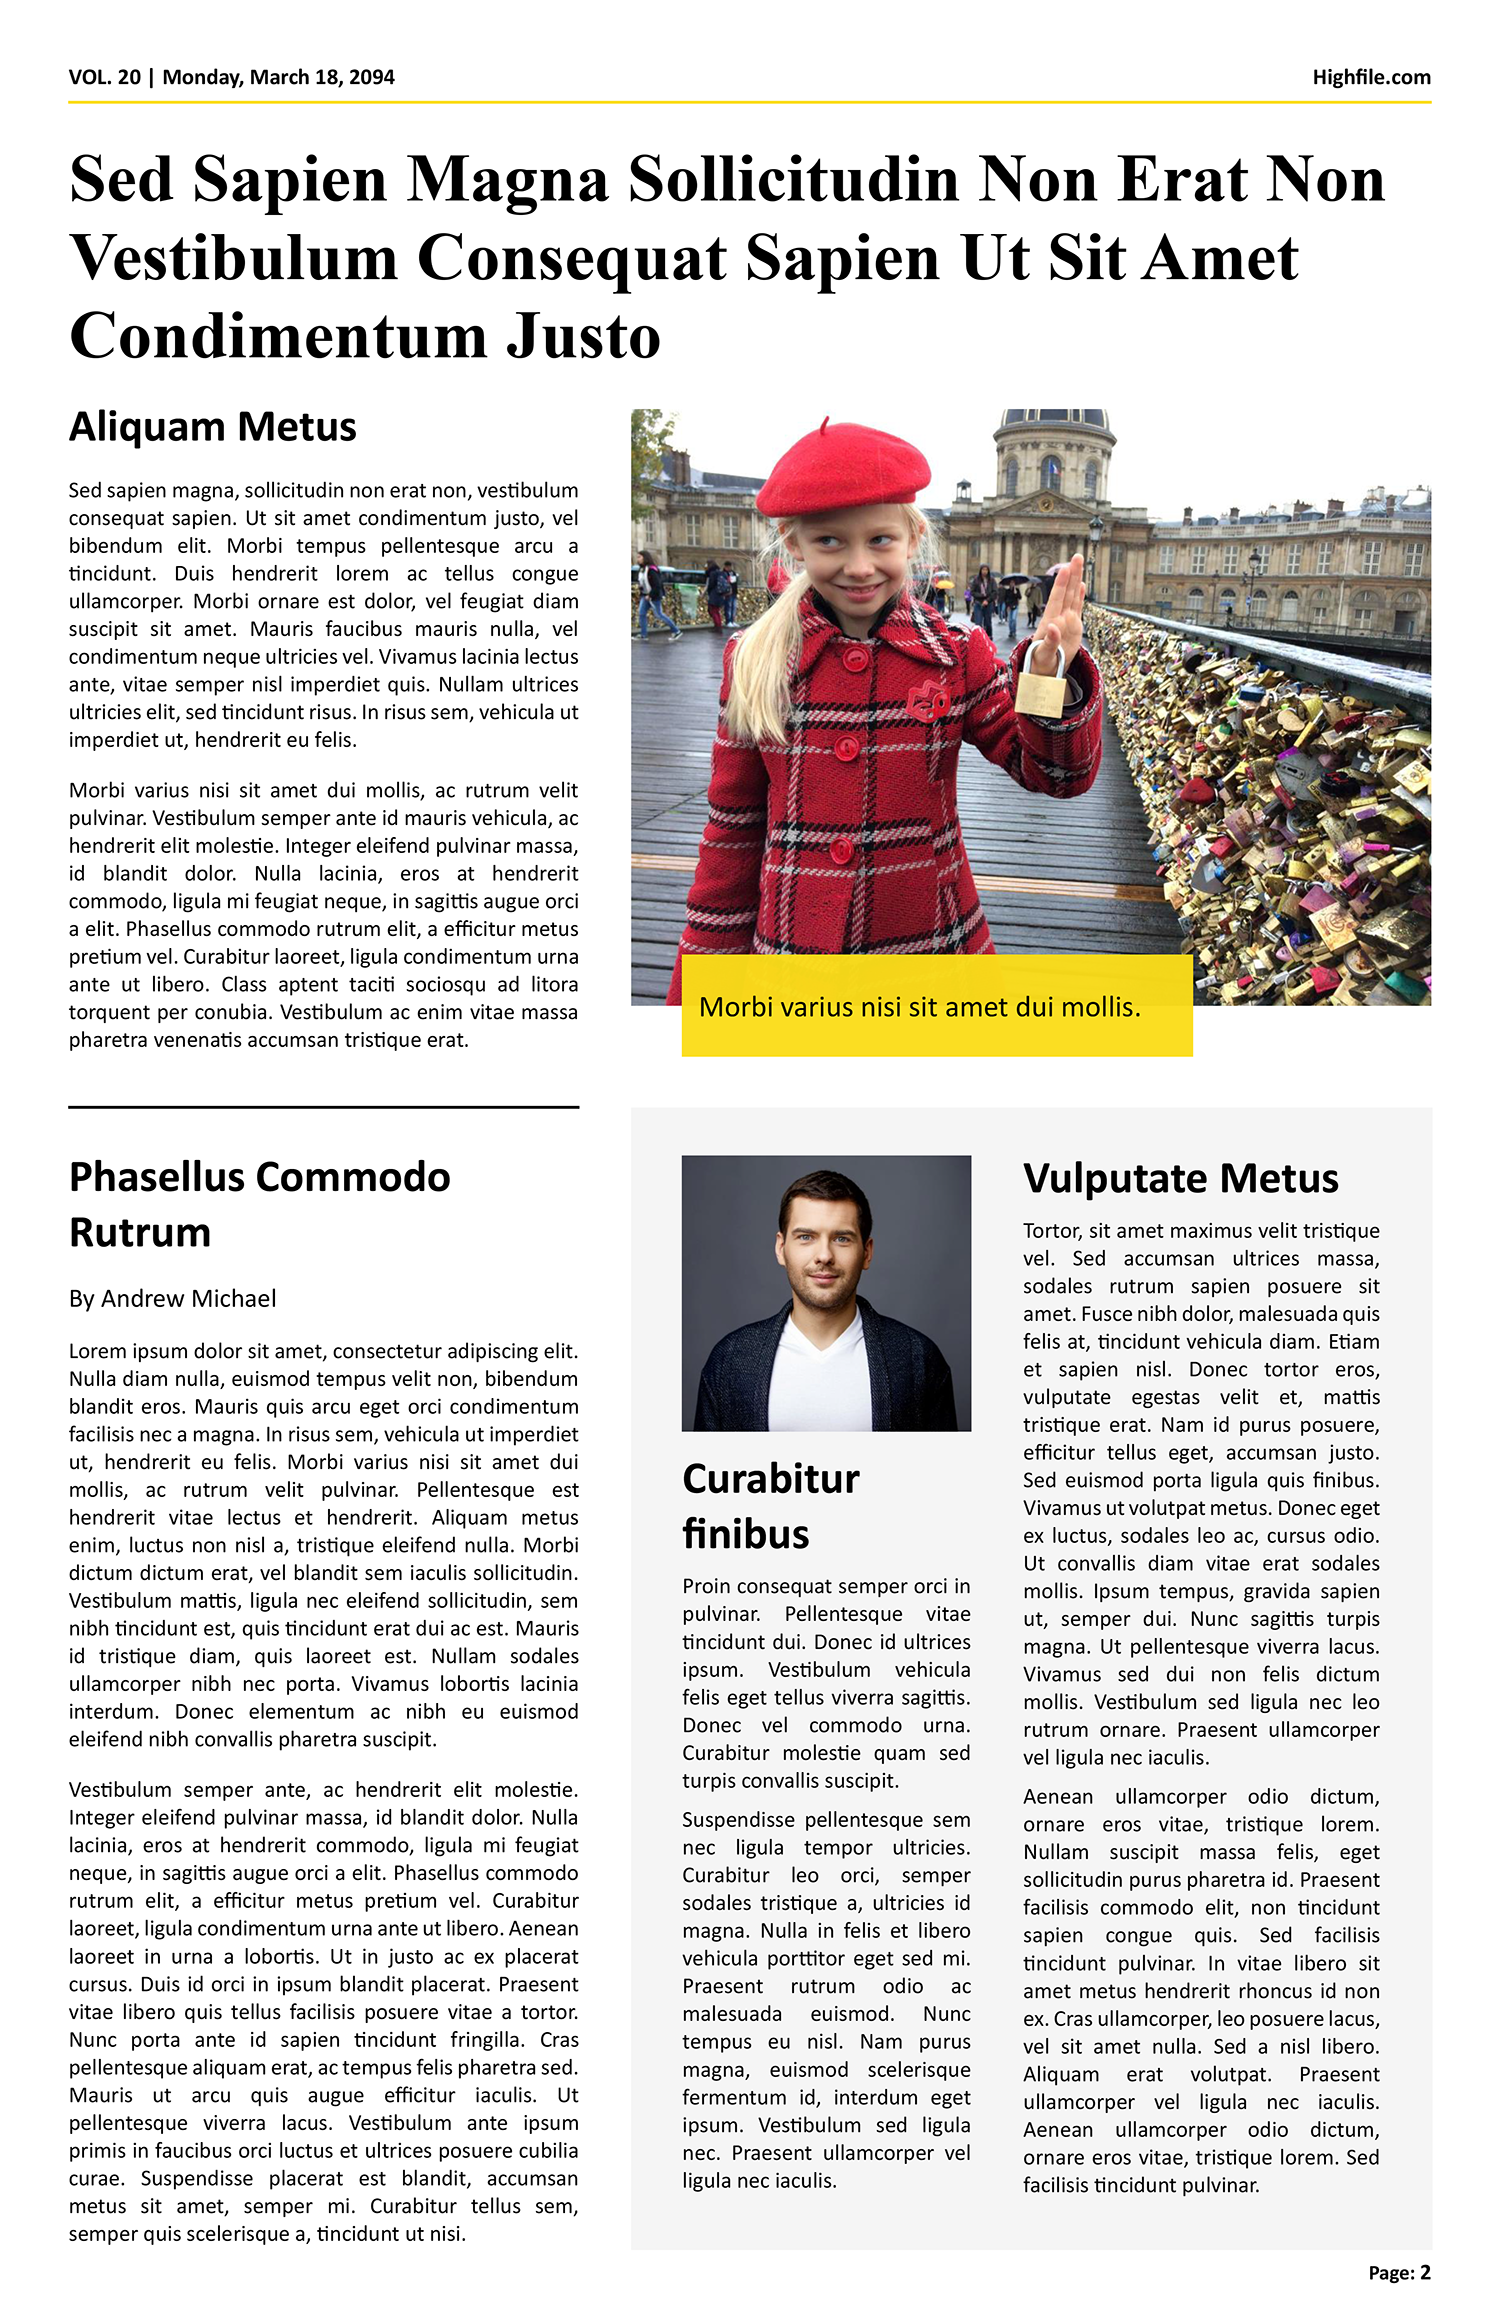 Modern Clean Newspaper Article Page Template - Page 02